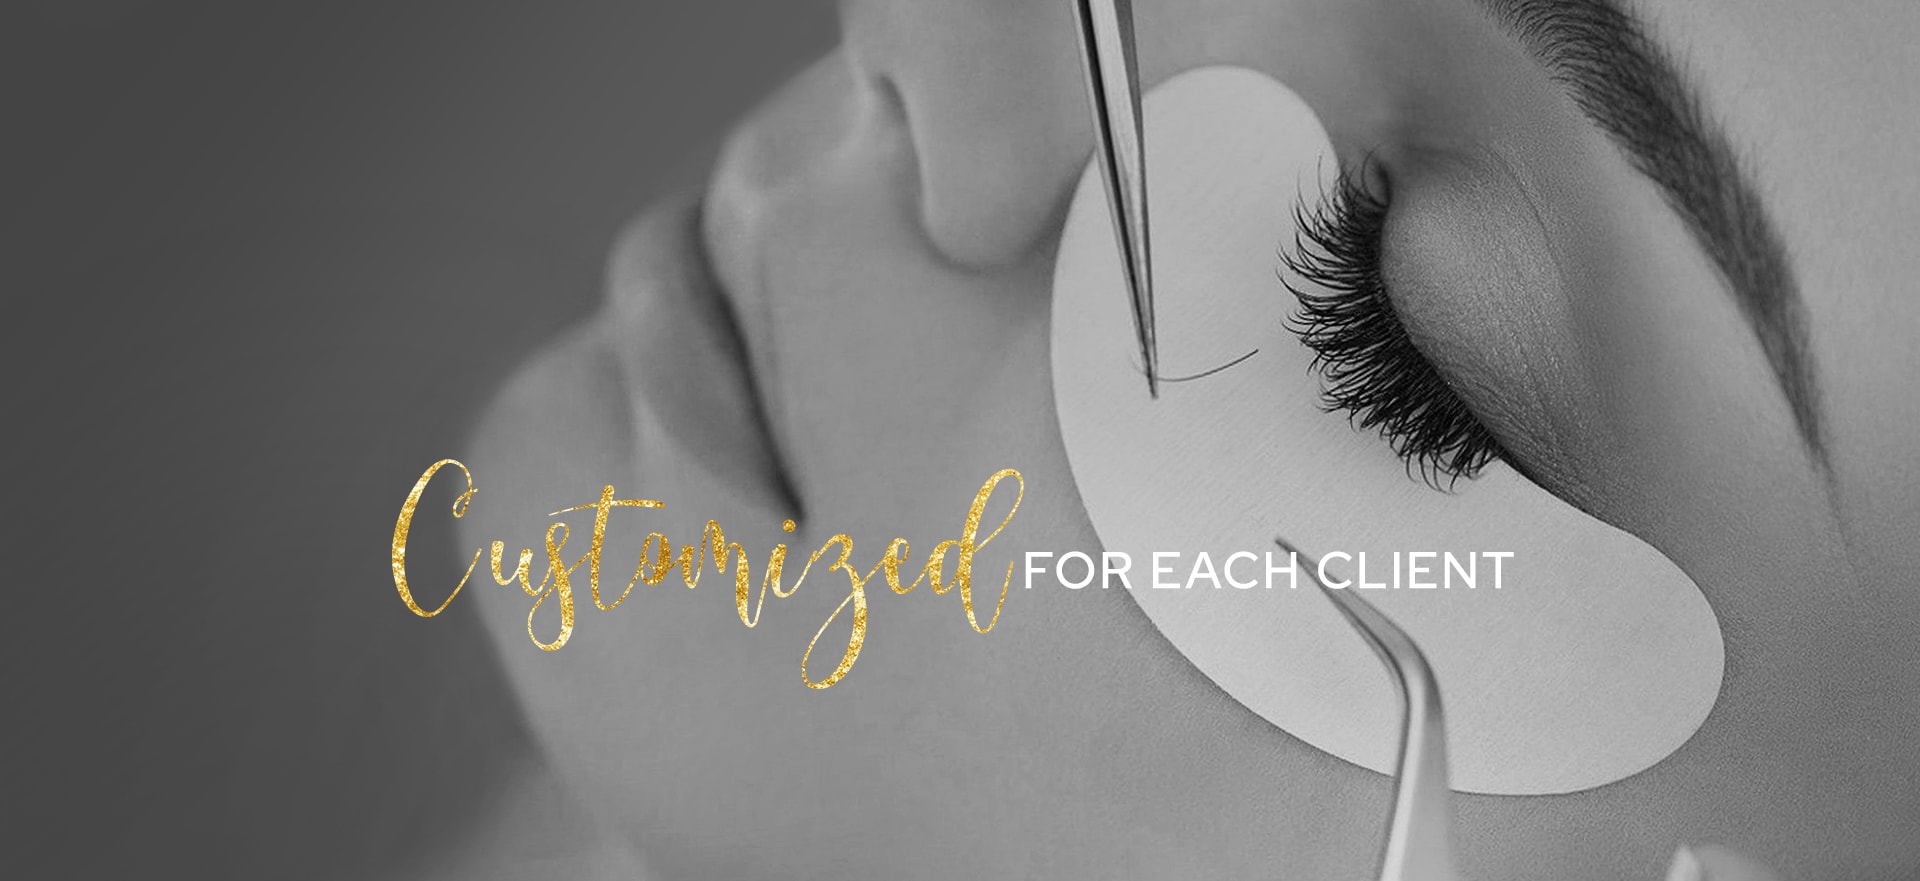 The Glam Life Beauty Bar: Lash Extensions & Microblading